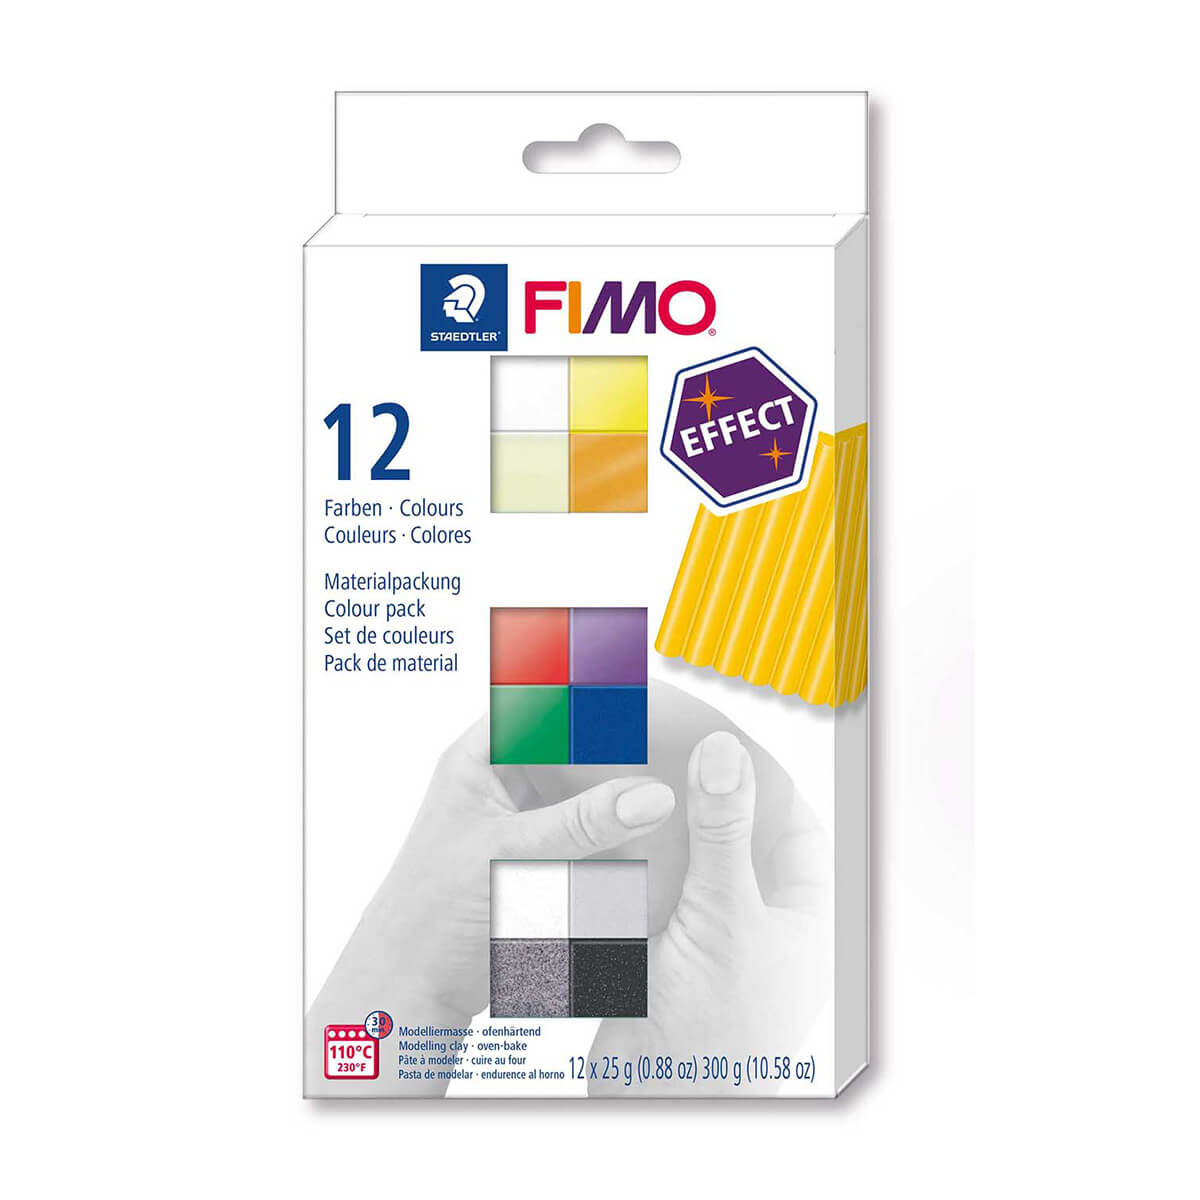 STAEDTLER FIMO soft modelling clay 12 effect colours